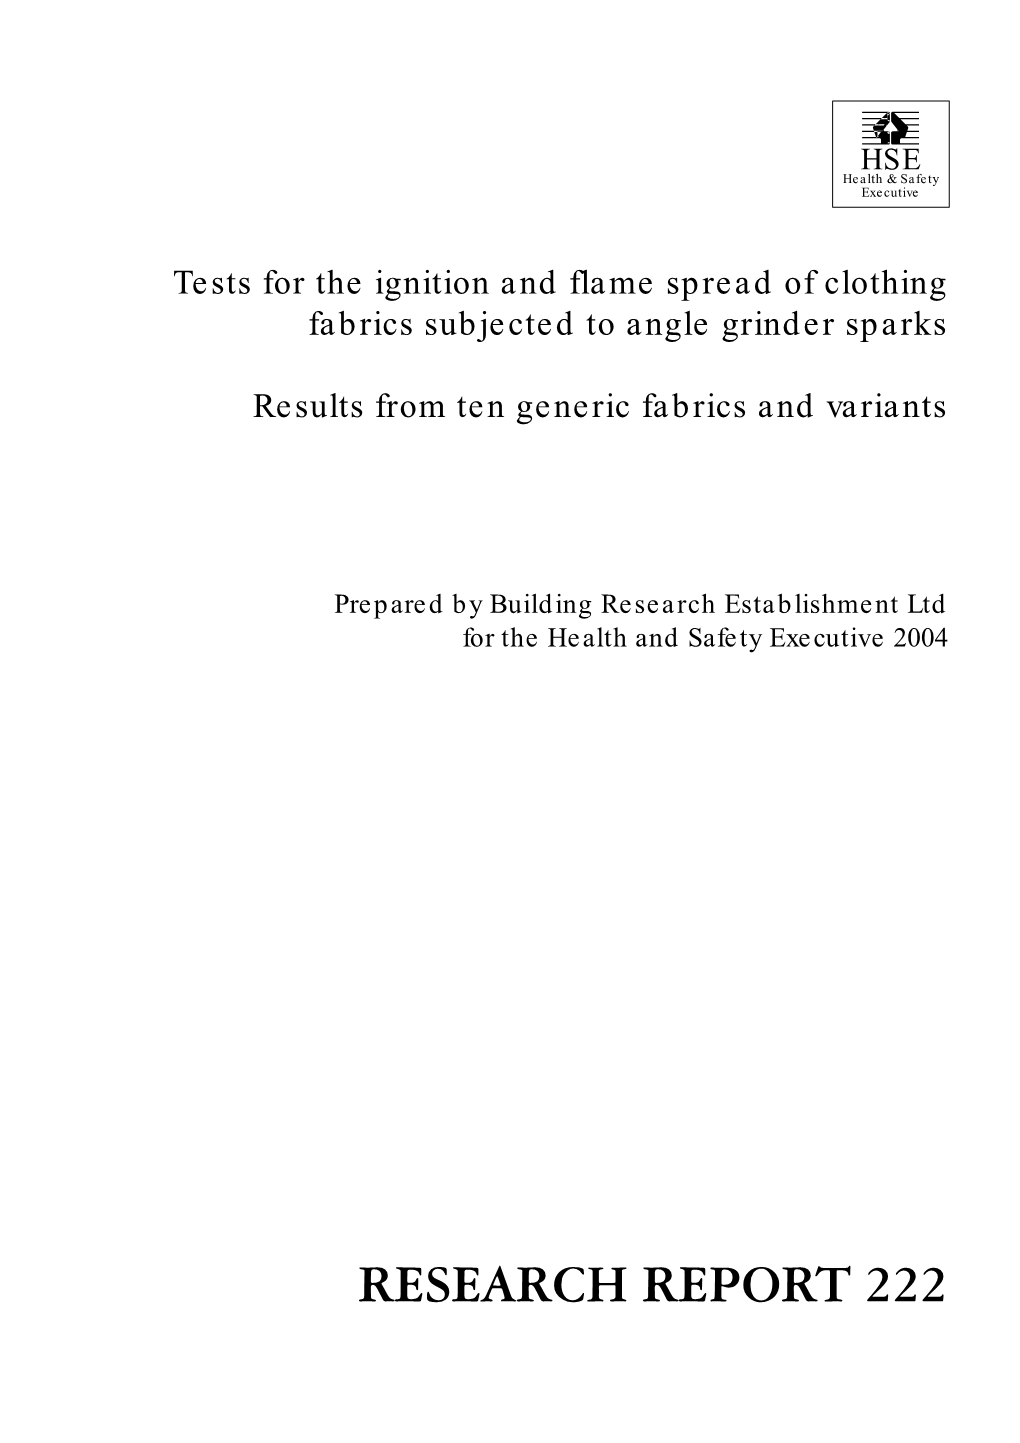 Tests for the Ignition and Flame Spread of Clothing Fabrics Subjected to Angle Grinder Sparks